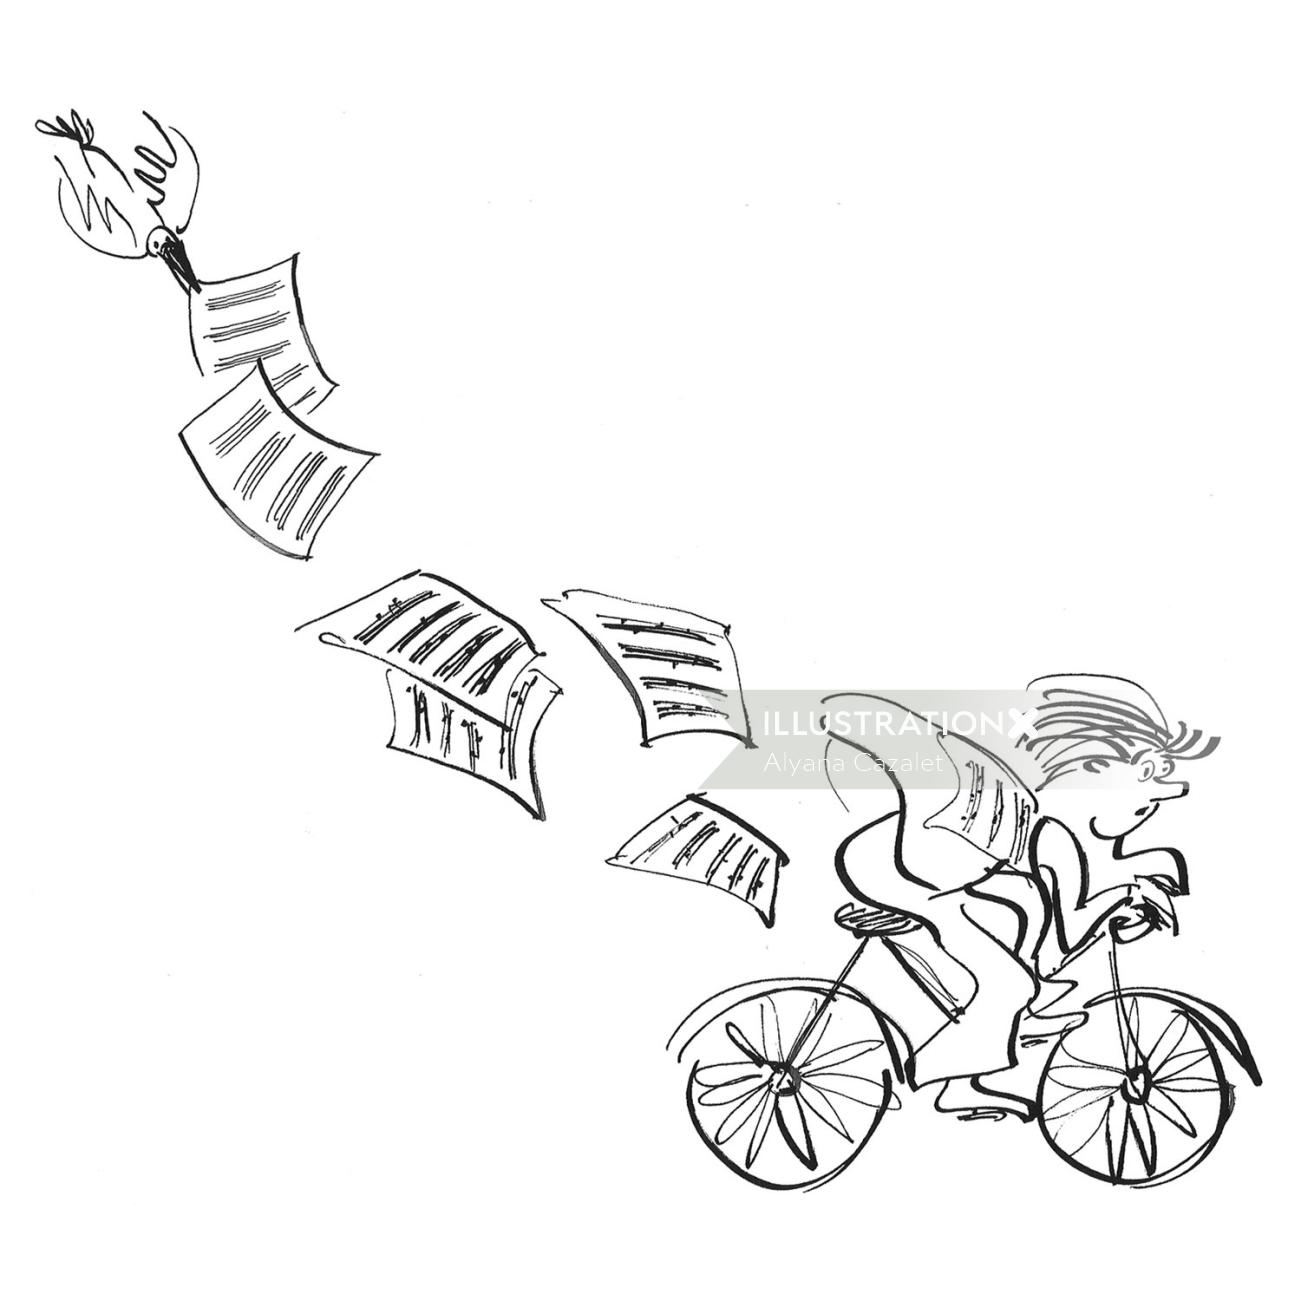 An illustration of man riding bicycle